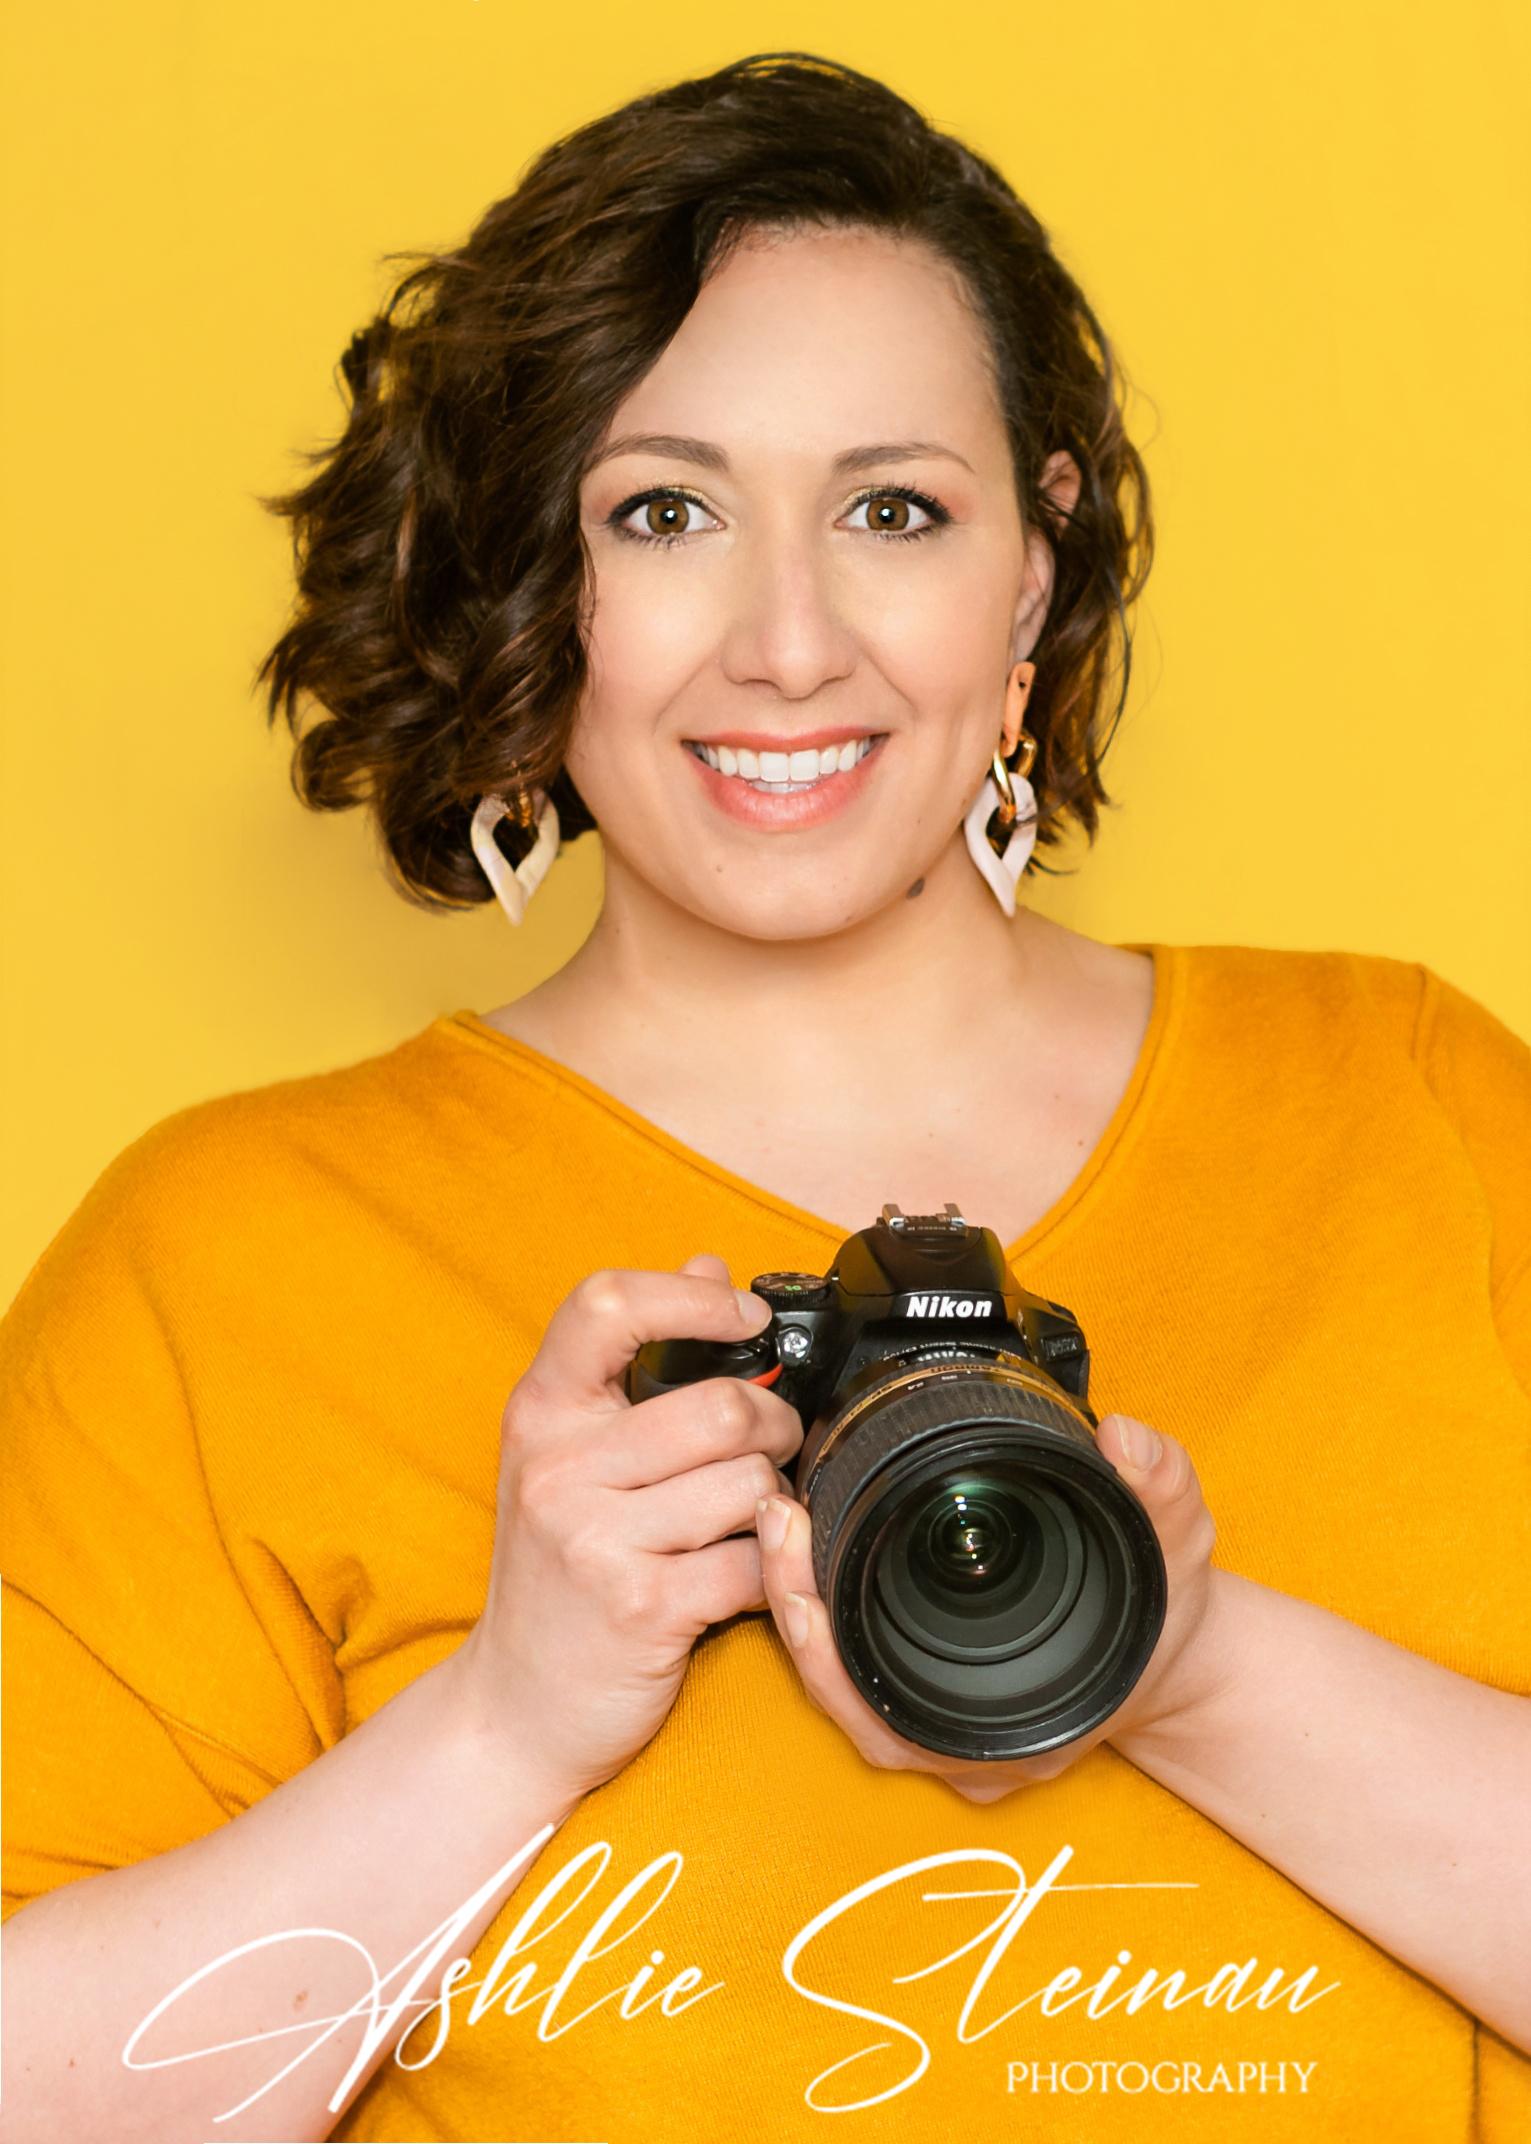 How a Homeschooling Mom of 3 Rescued Her Floundering Photography Business